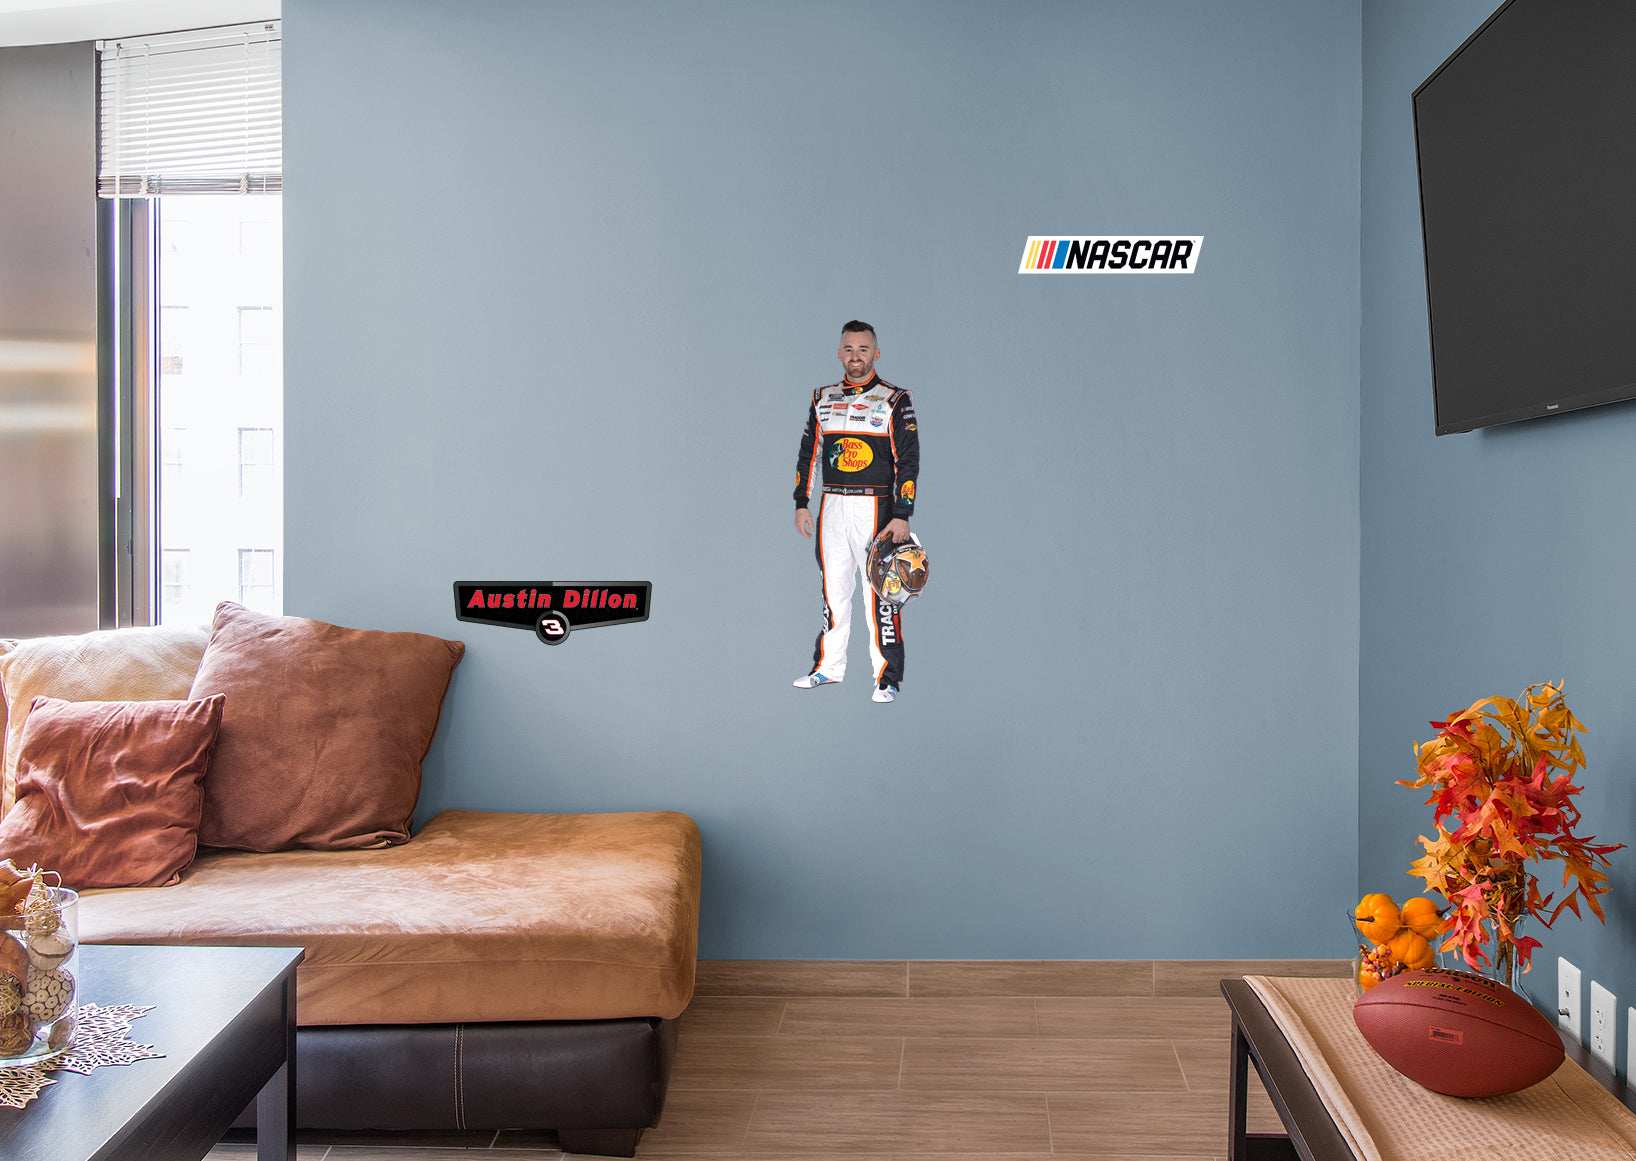 Austin Dillon 2021 Driver - Officially Licensed NASCAR Removable Wall Decal XL by Fathead | Vinyl